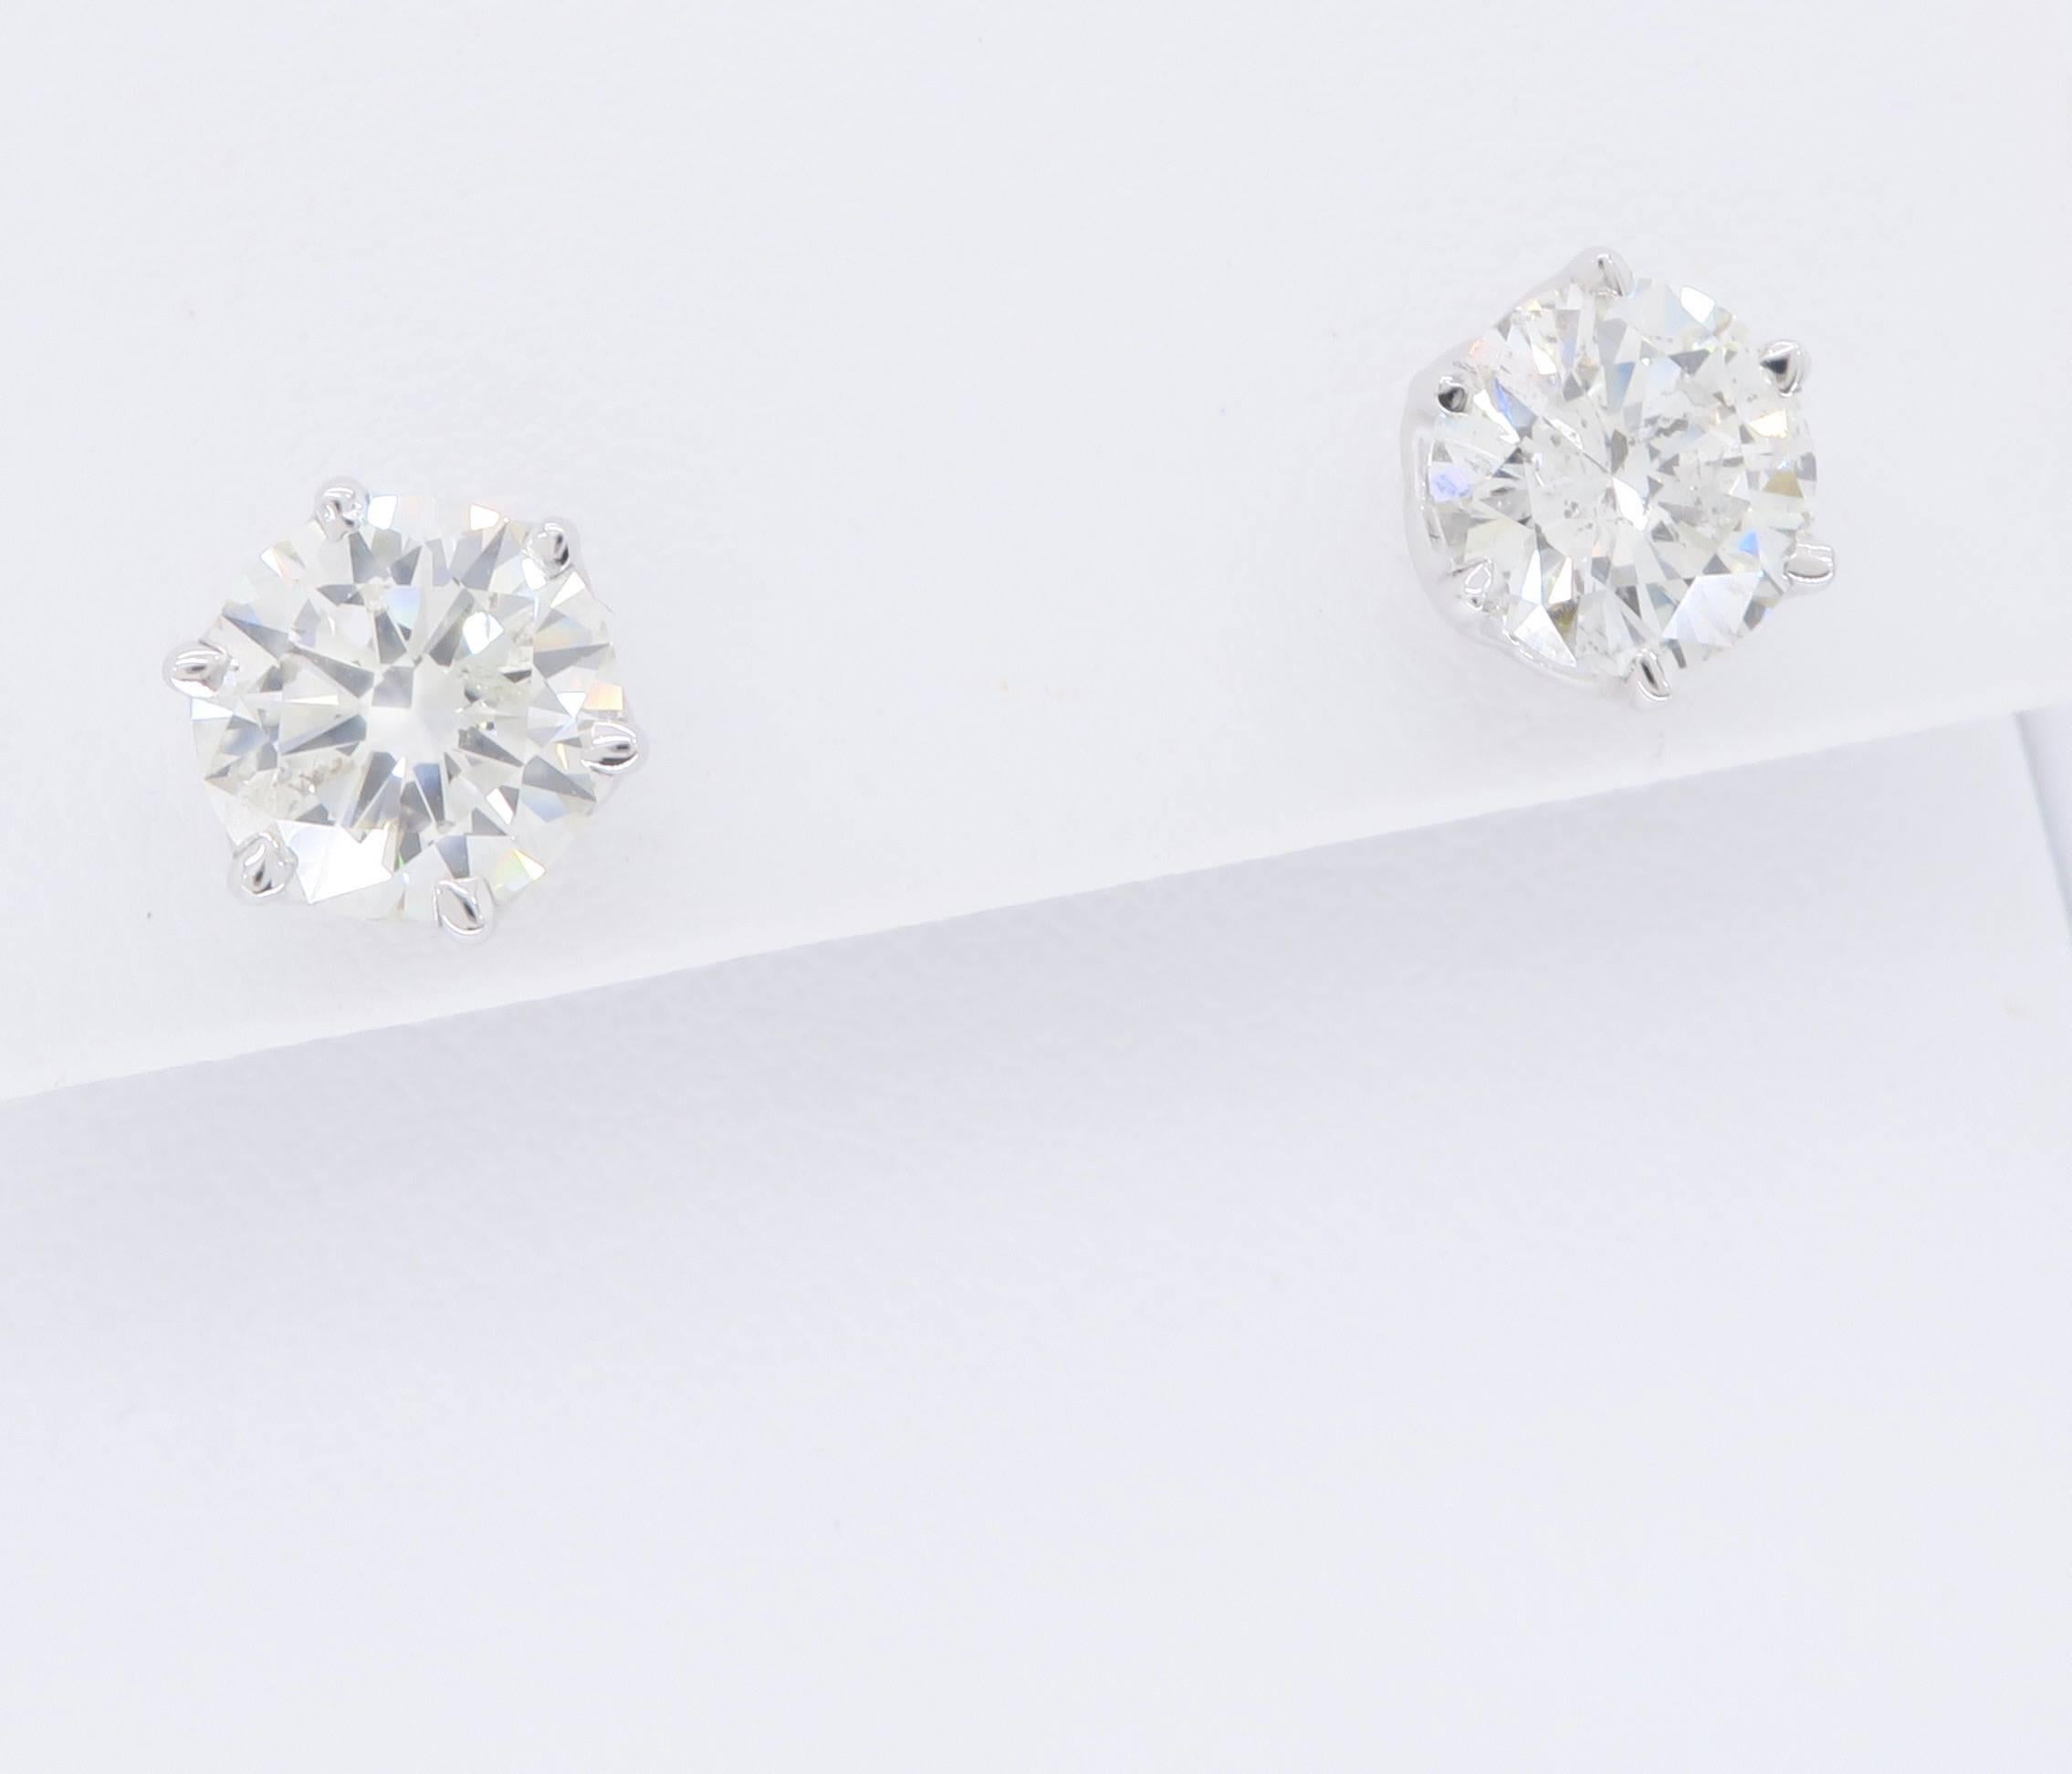 Classic Diamond stud earrings set in ornate and beautiful 14K White Gold baskets. The diamonds are 1.25CT, and 1.23CT Round Brilliant Cut Diamonds with I-J color, and I1 clarity. The studs have a total carat weight of 2.48CTW. 